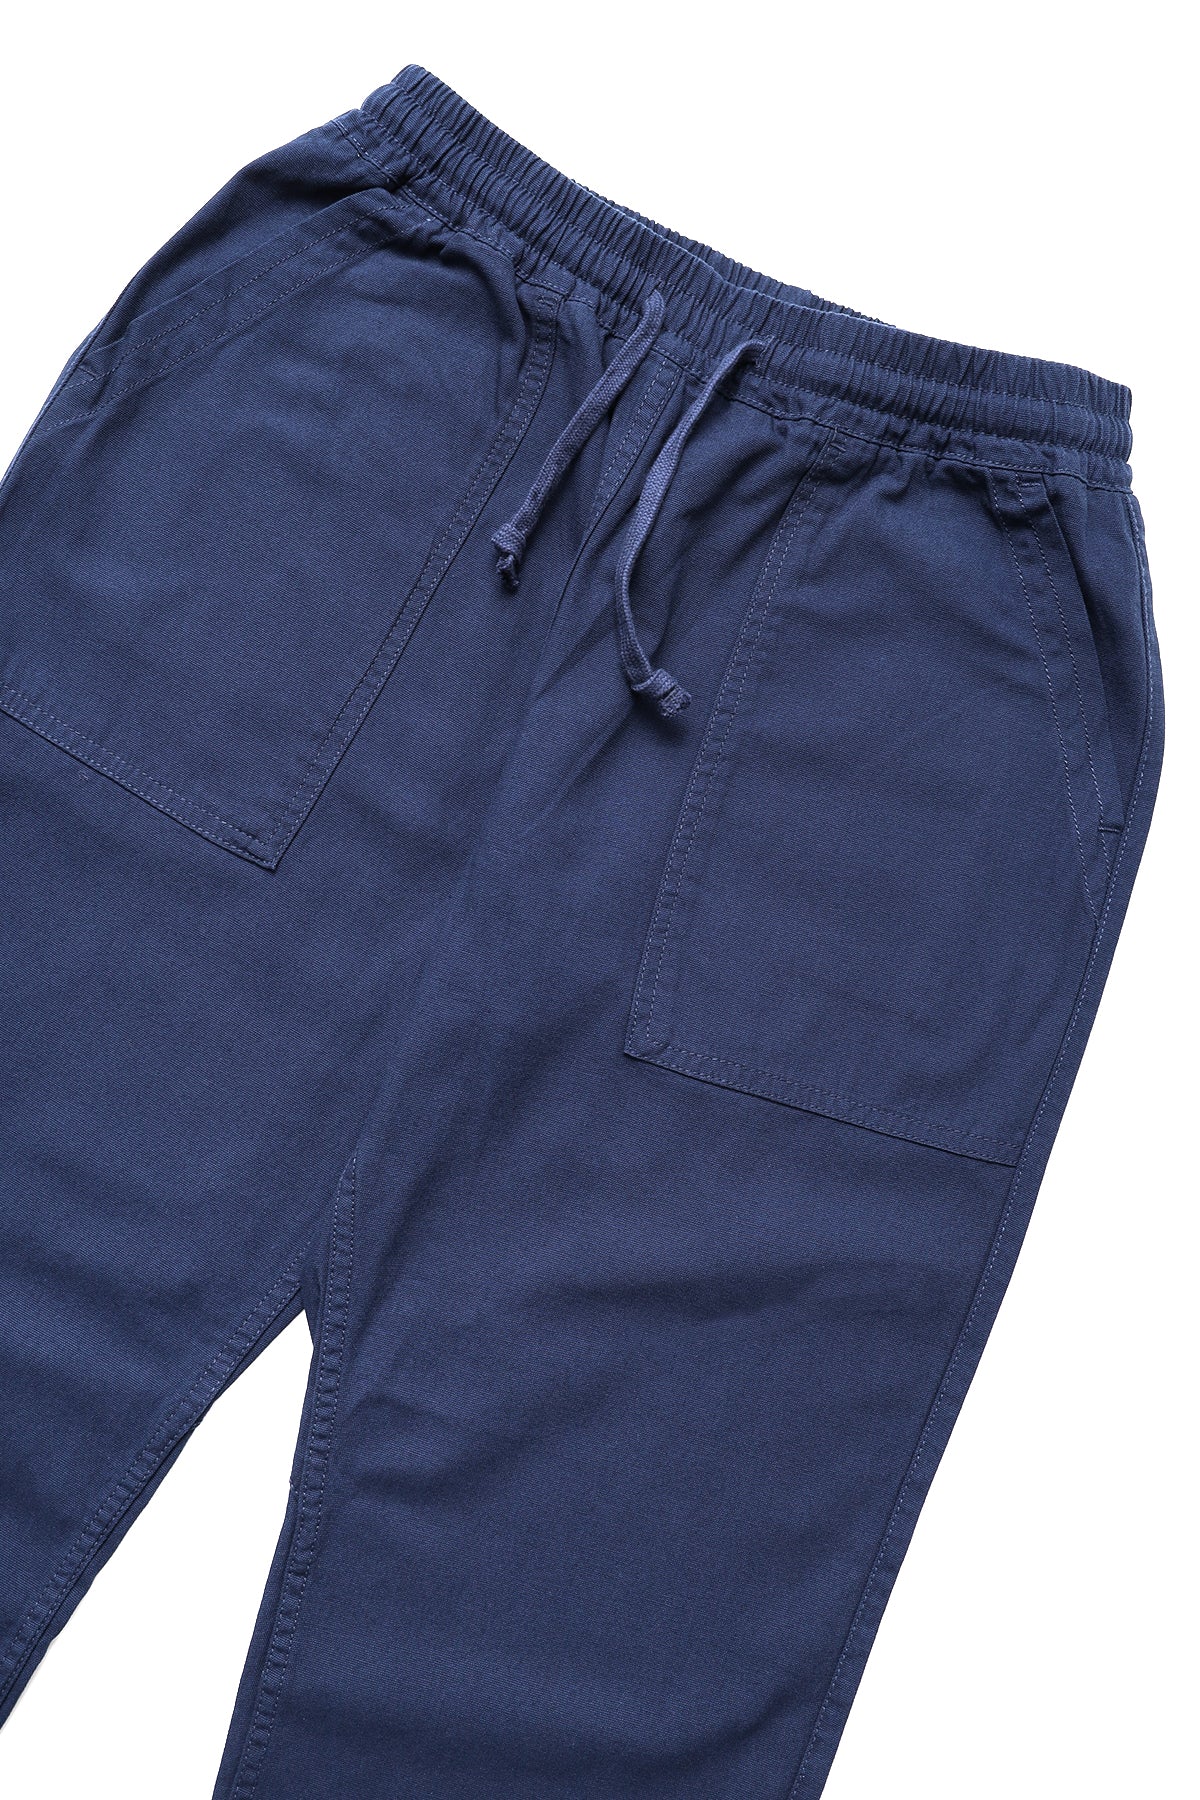 Service Works - Trade Chef Pants - Navy